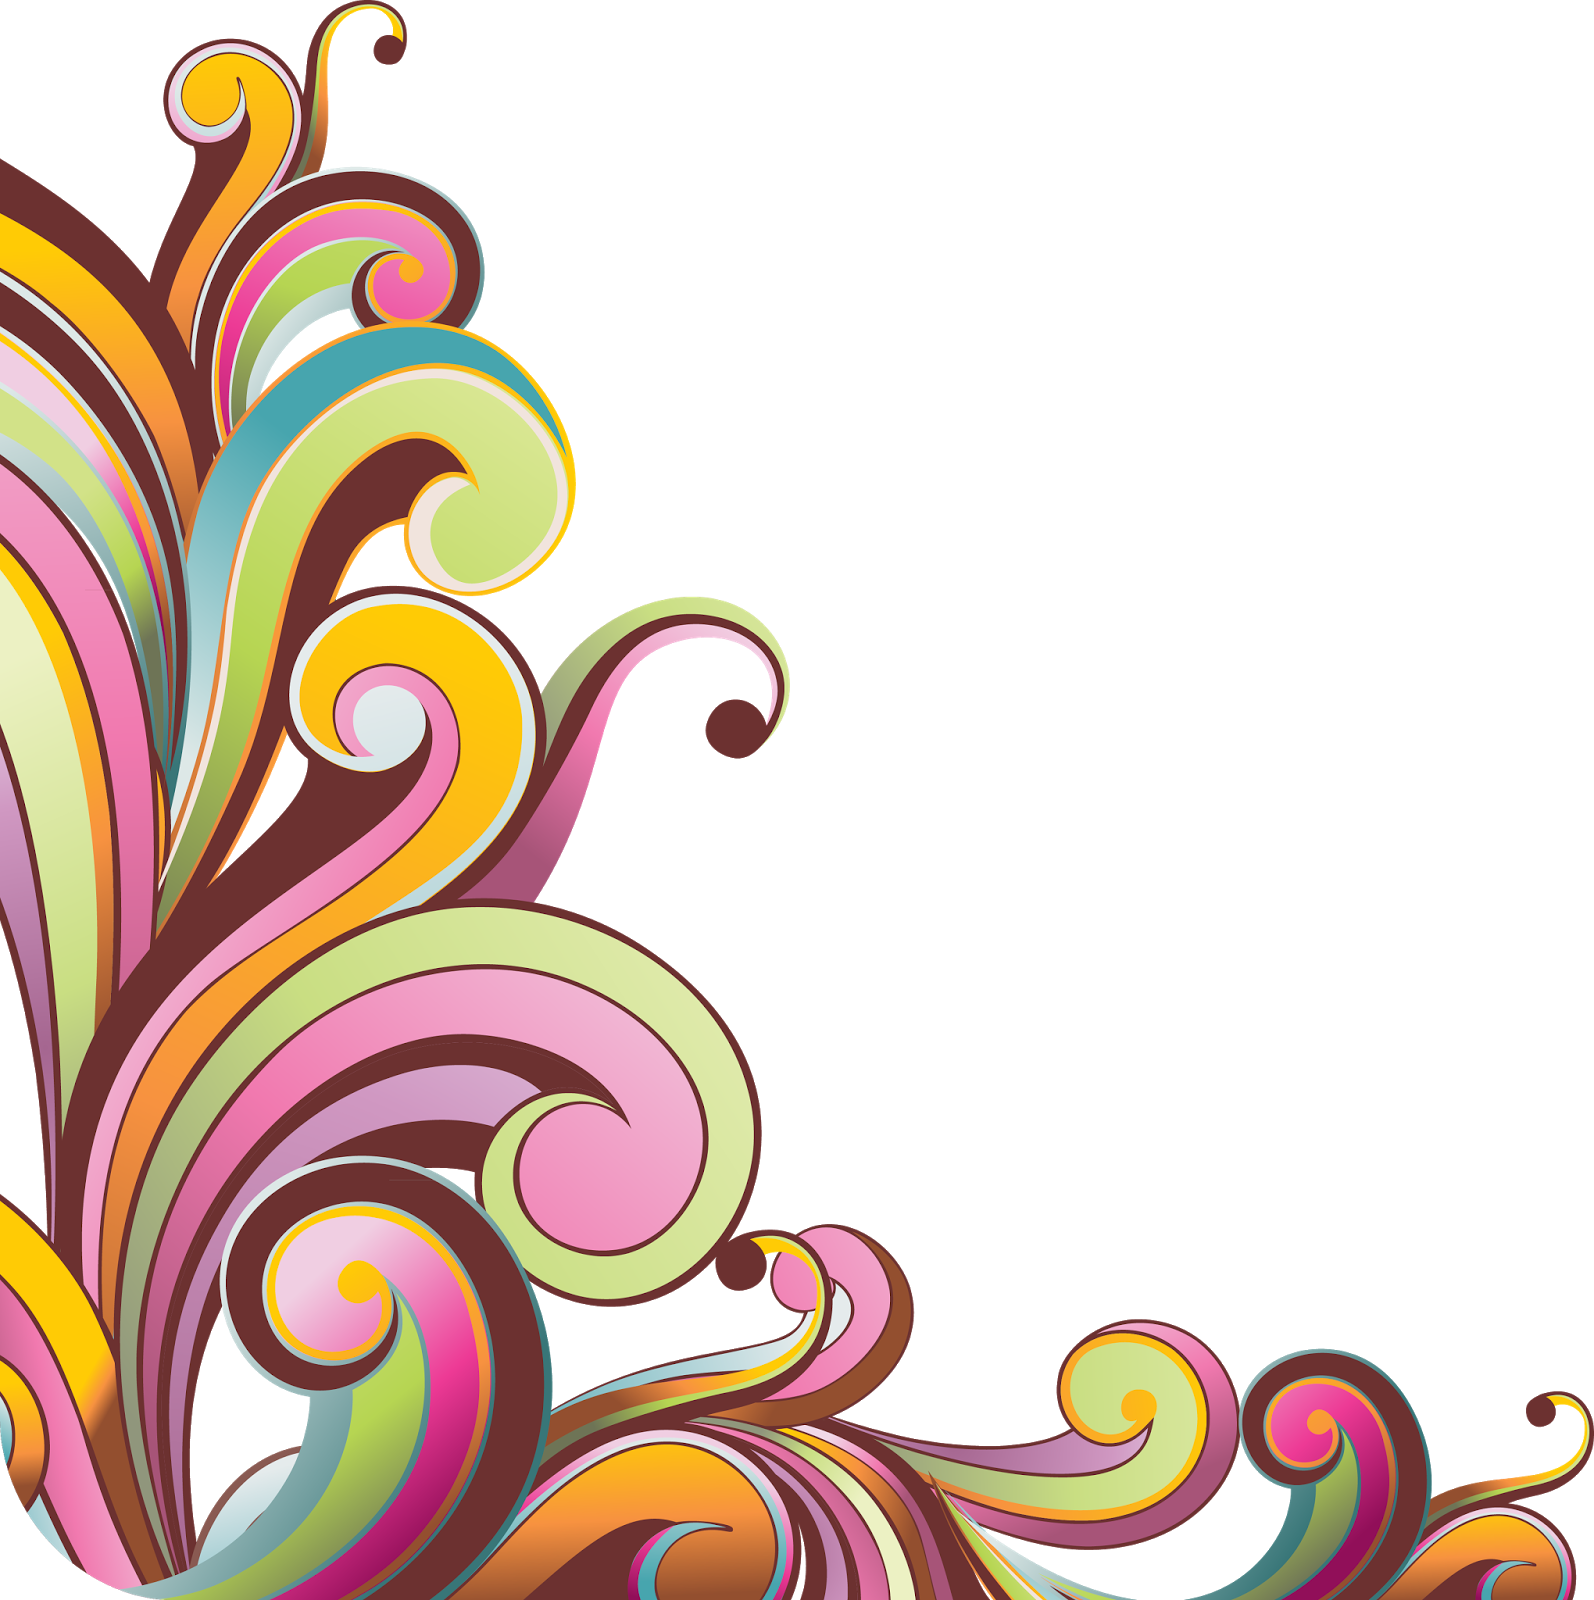 Abstract Swirl Design Background PNG image